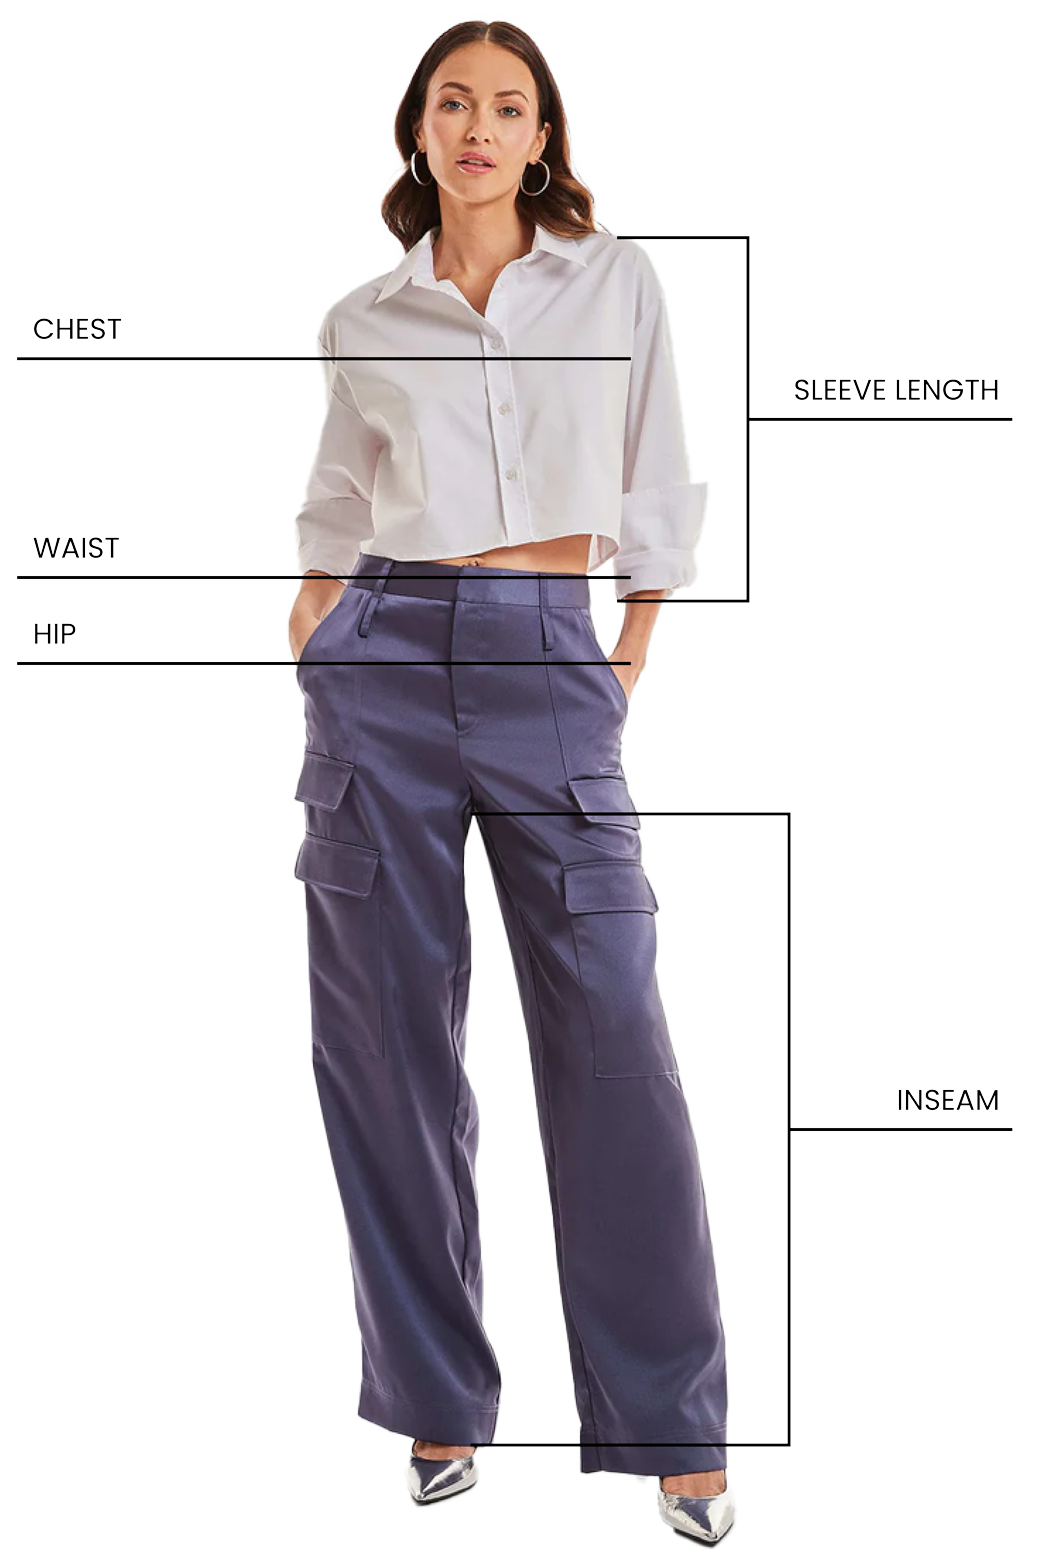 Woman modeling clothes with annotations indicating measurement points: chest, waist, hip, sleeve length, and inseam.